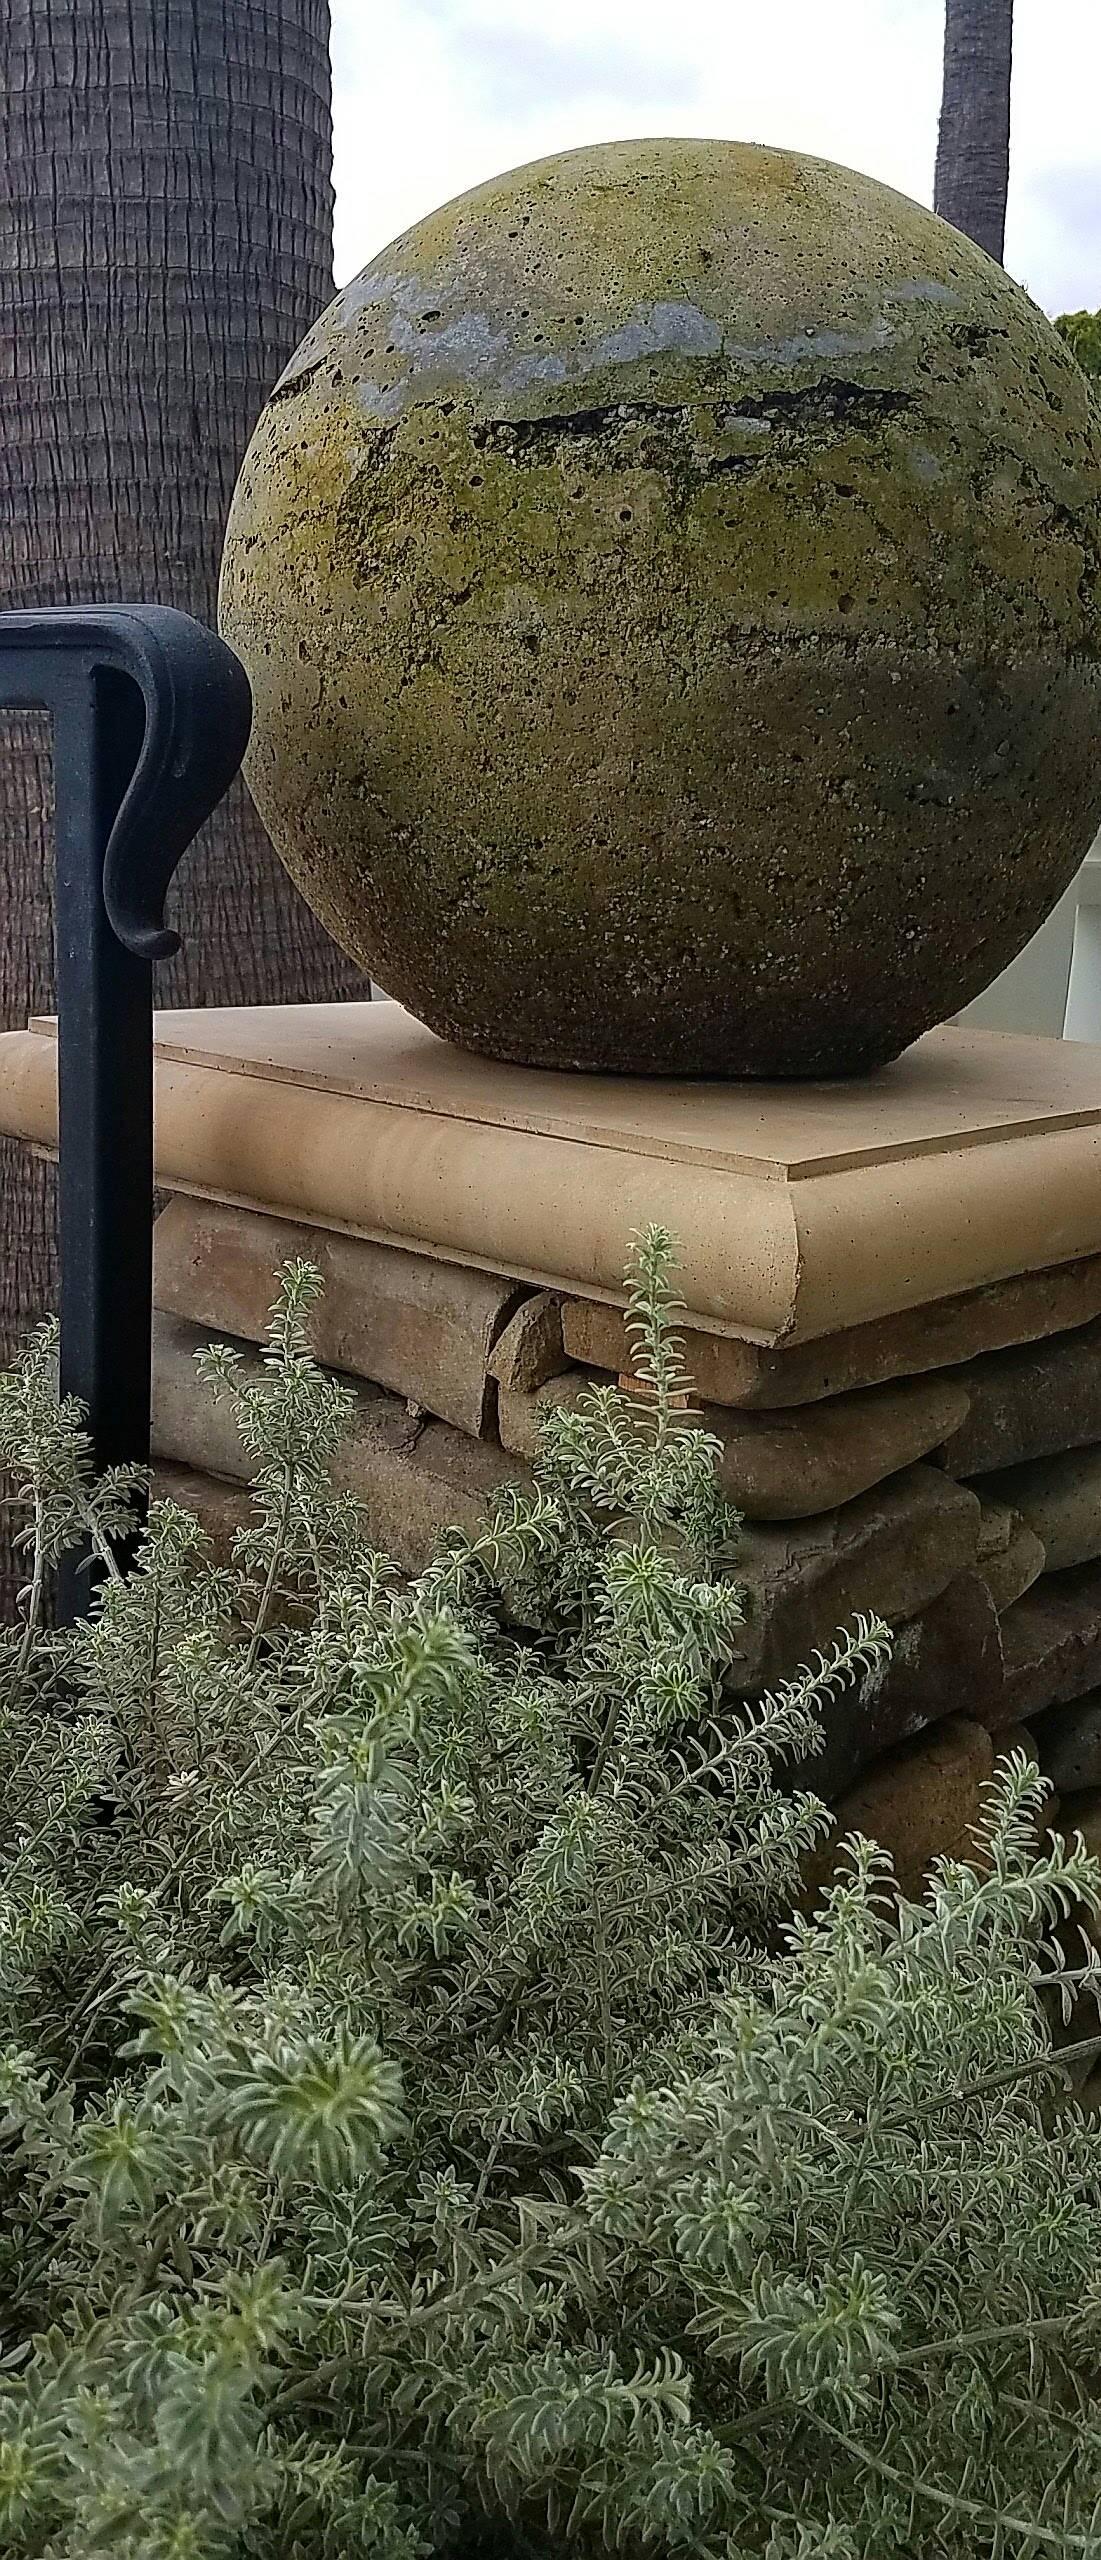 Hand-Crafted Magnificent Hypertufa Garden Spheres in Various Sizes